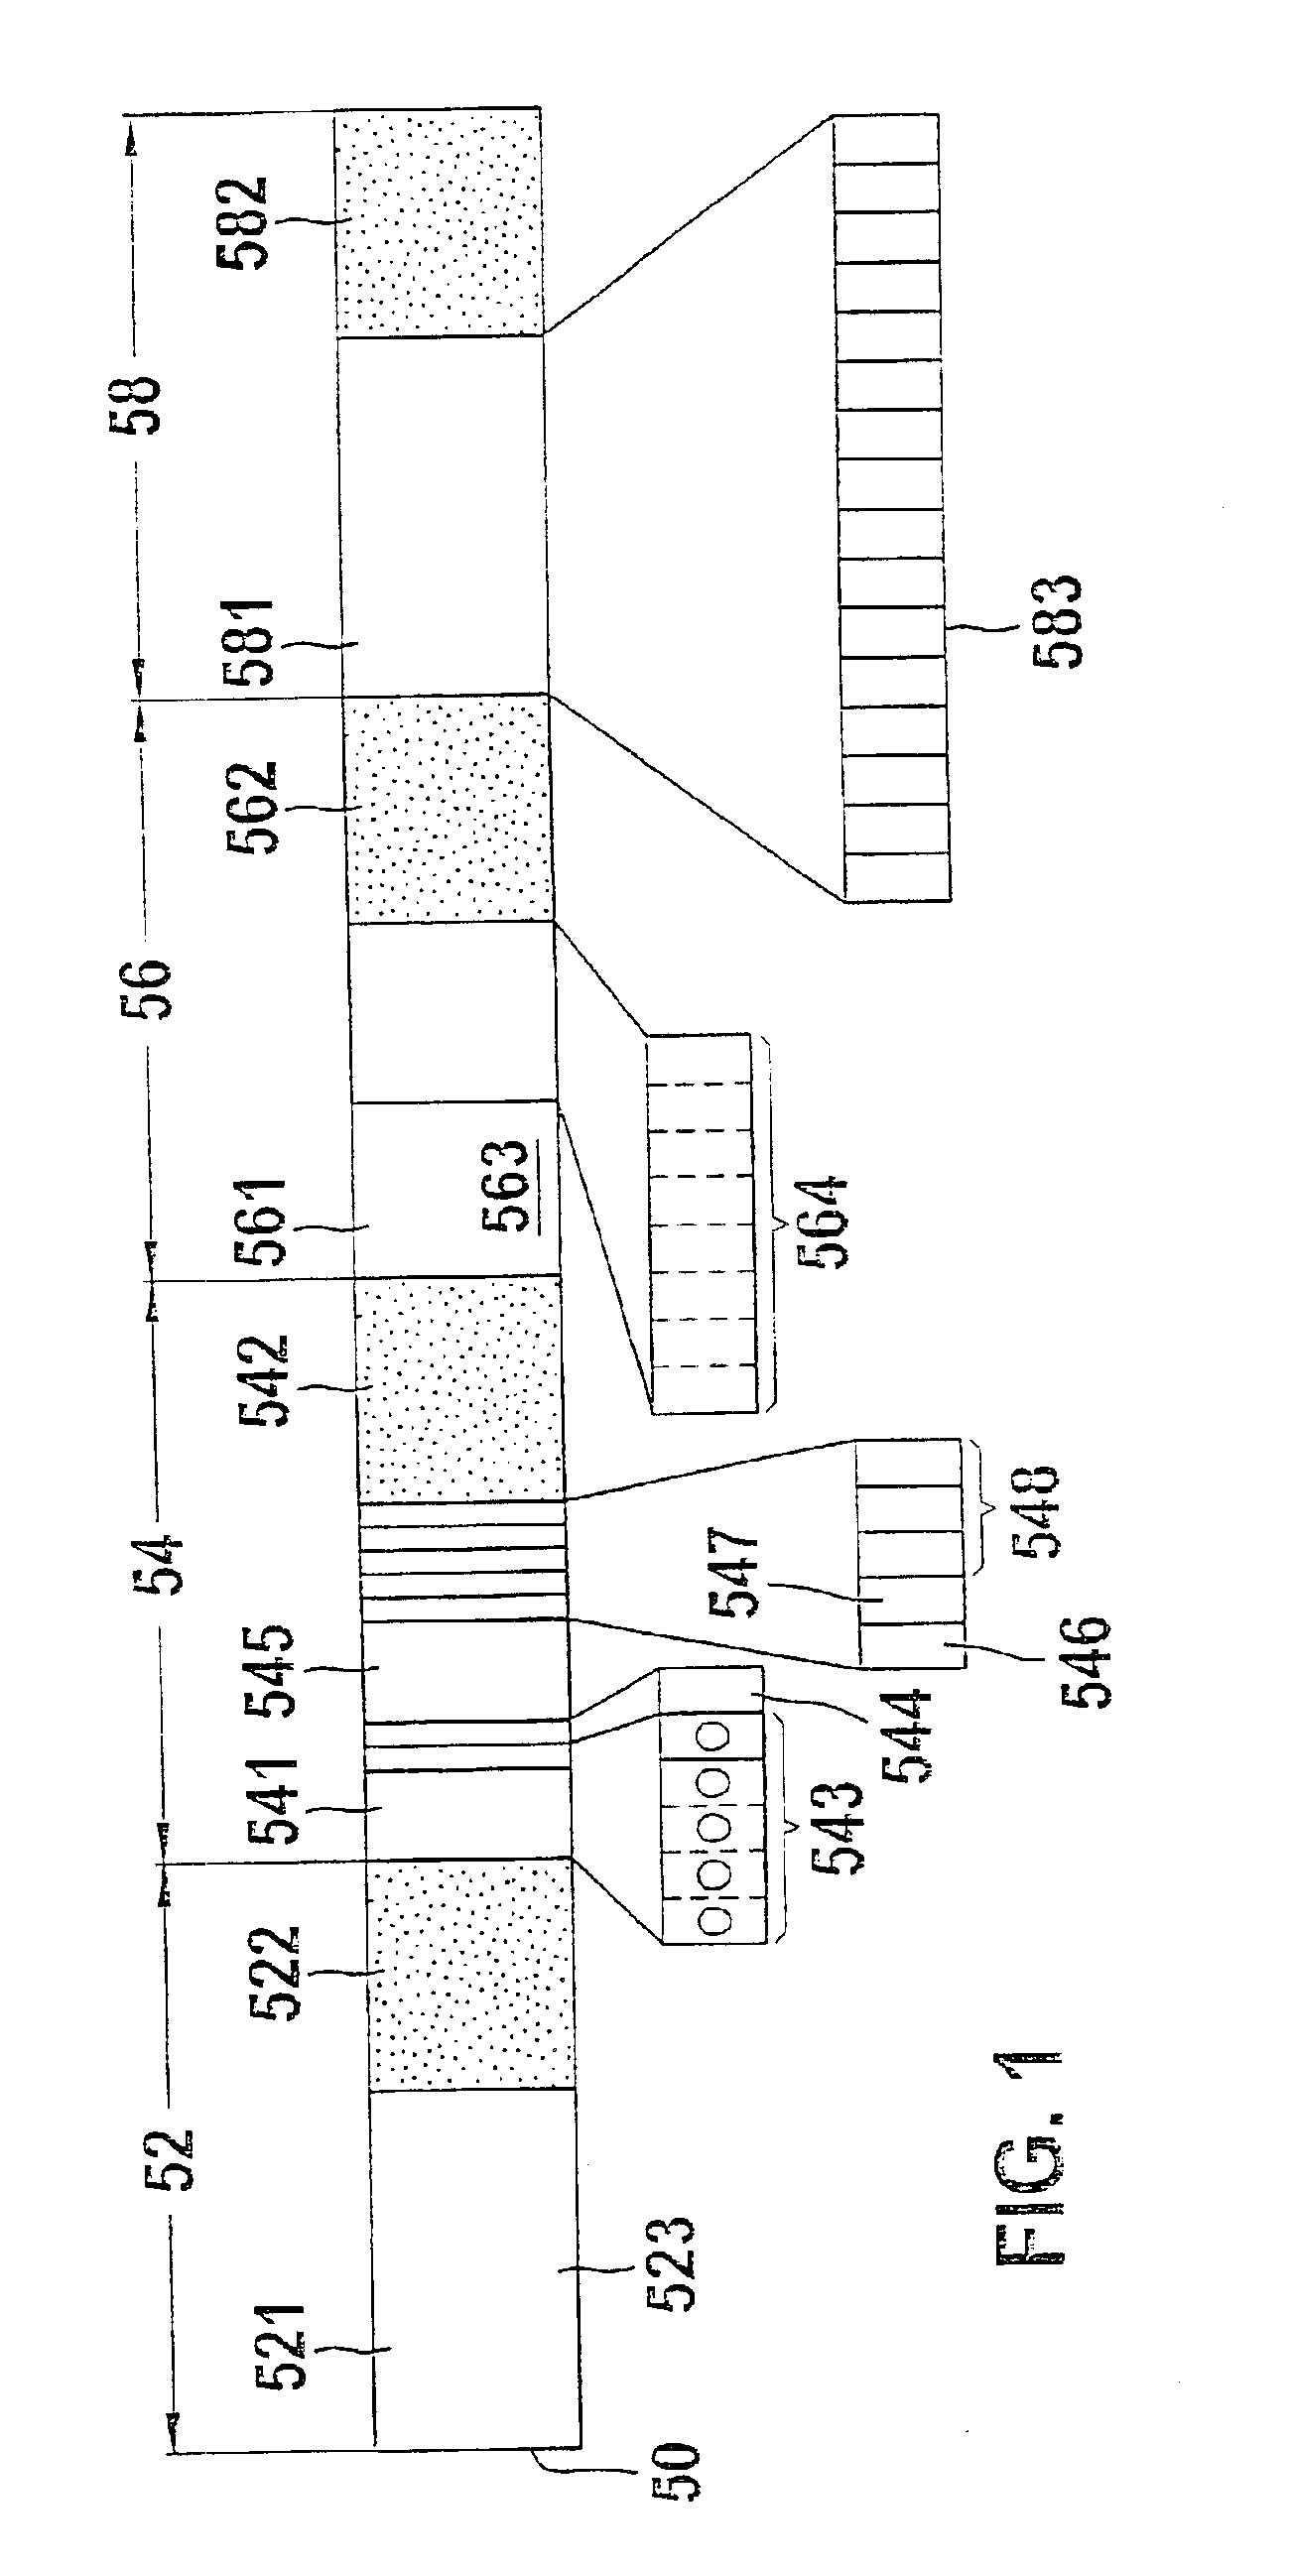 Method for masking interruptions on playback of received radio signals